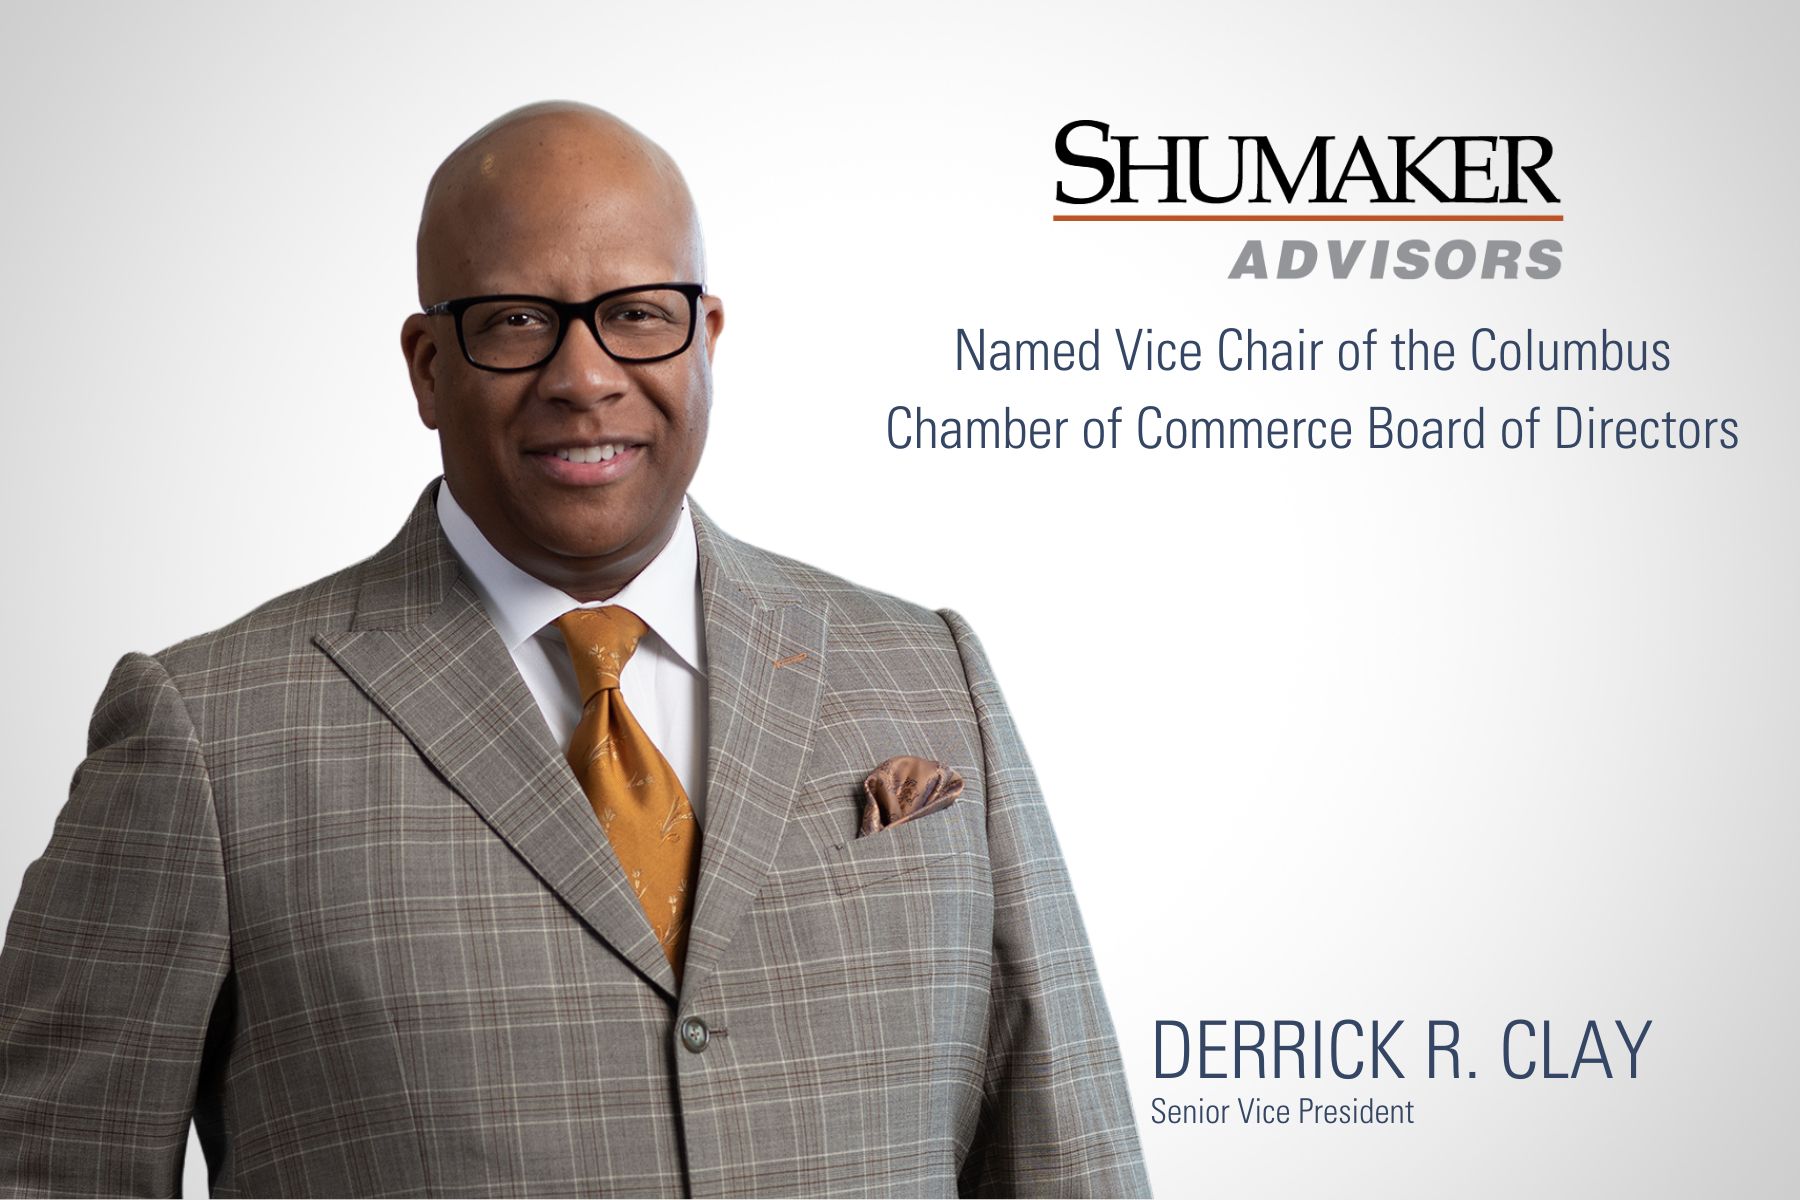 Derrick R. Clay Named Vice Chair of the Columbus Chamber of Commerce Board of Directors